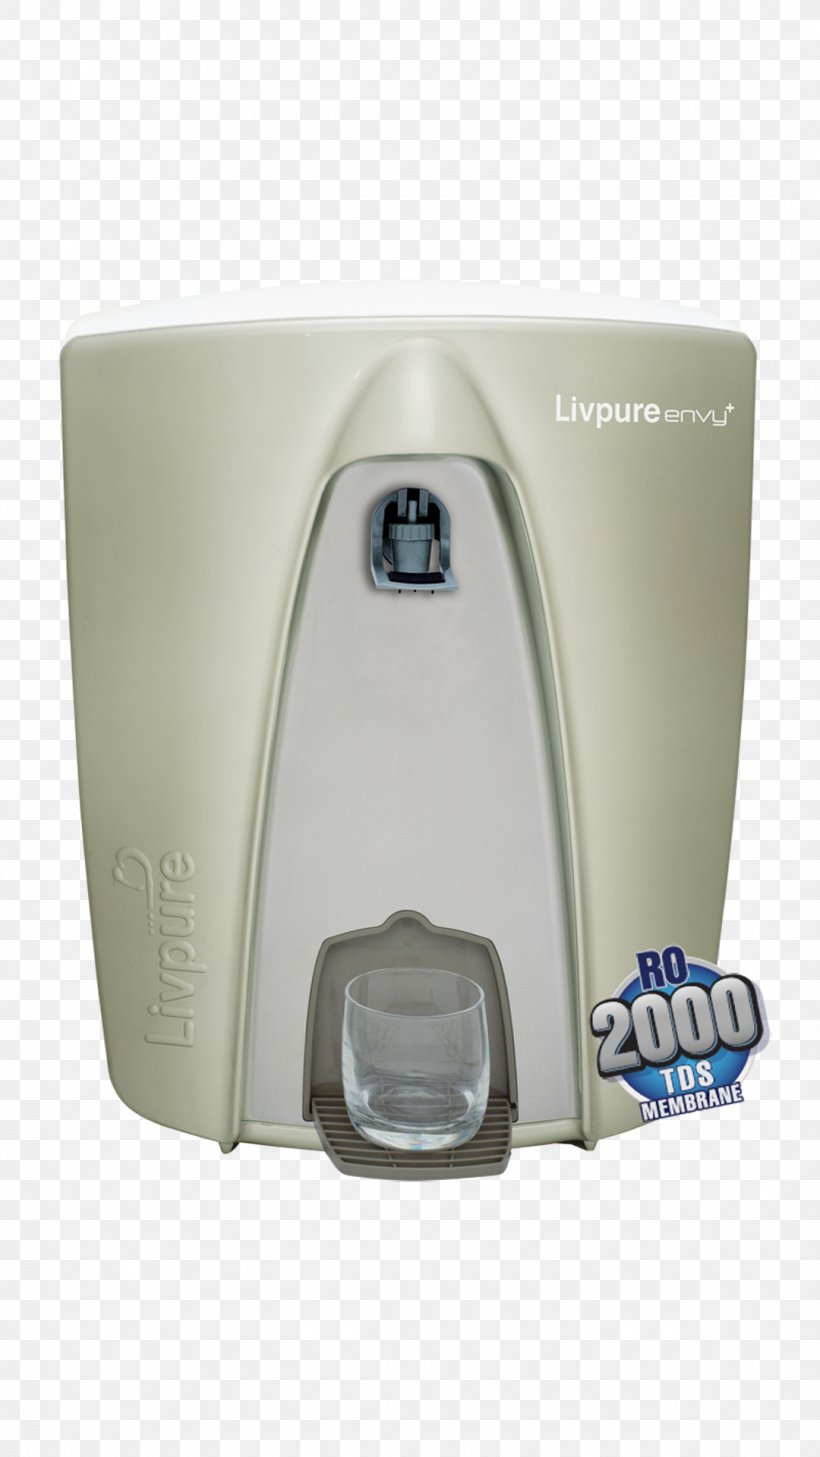 Water Filter Water Purification Reverse Osmosis Pureit Livpure Envy Plus RO+UV+UF Water Purifier With Pre Filter, PNG, 1080x1920px, Water Filter, Air Purifiers, Bathroom Accessory, Carbon Filtering, Drinking Water Download Free